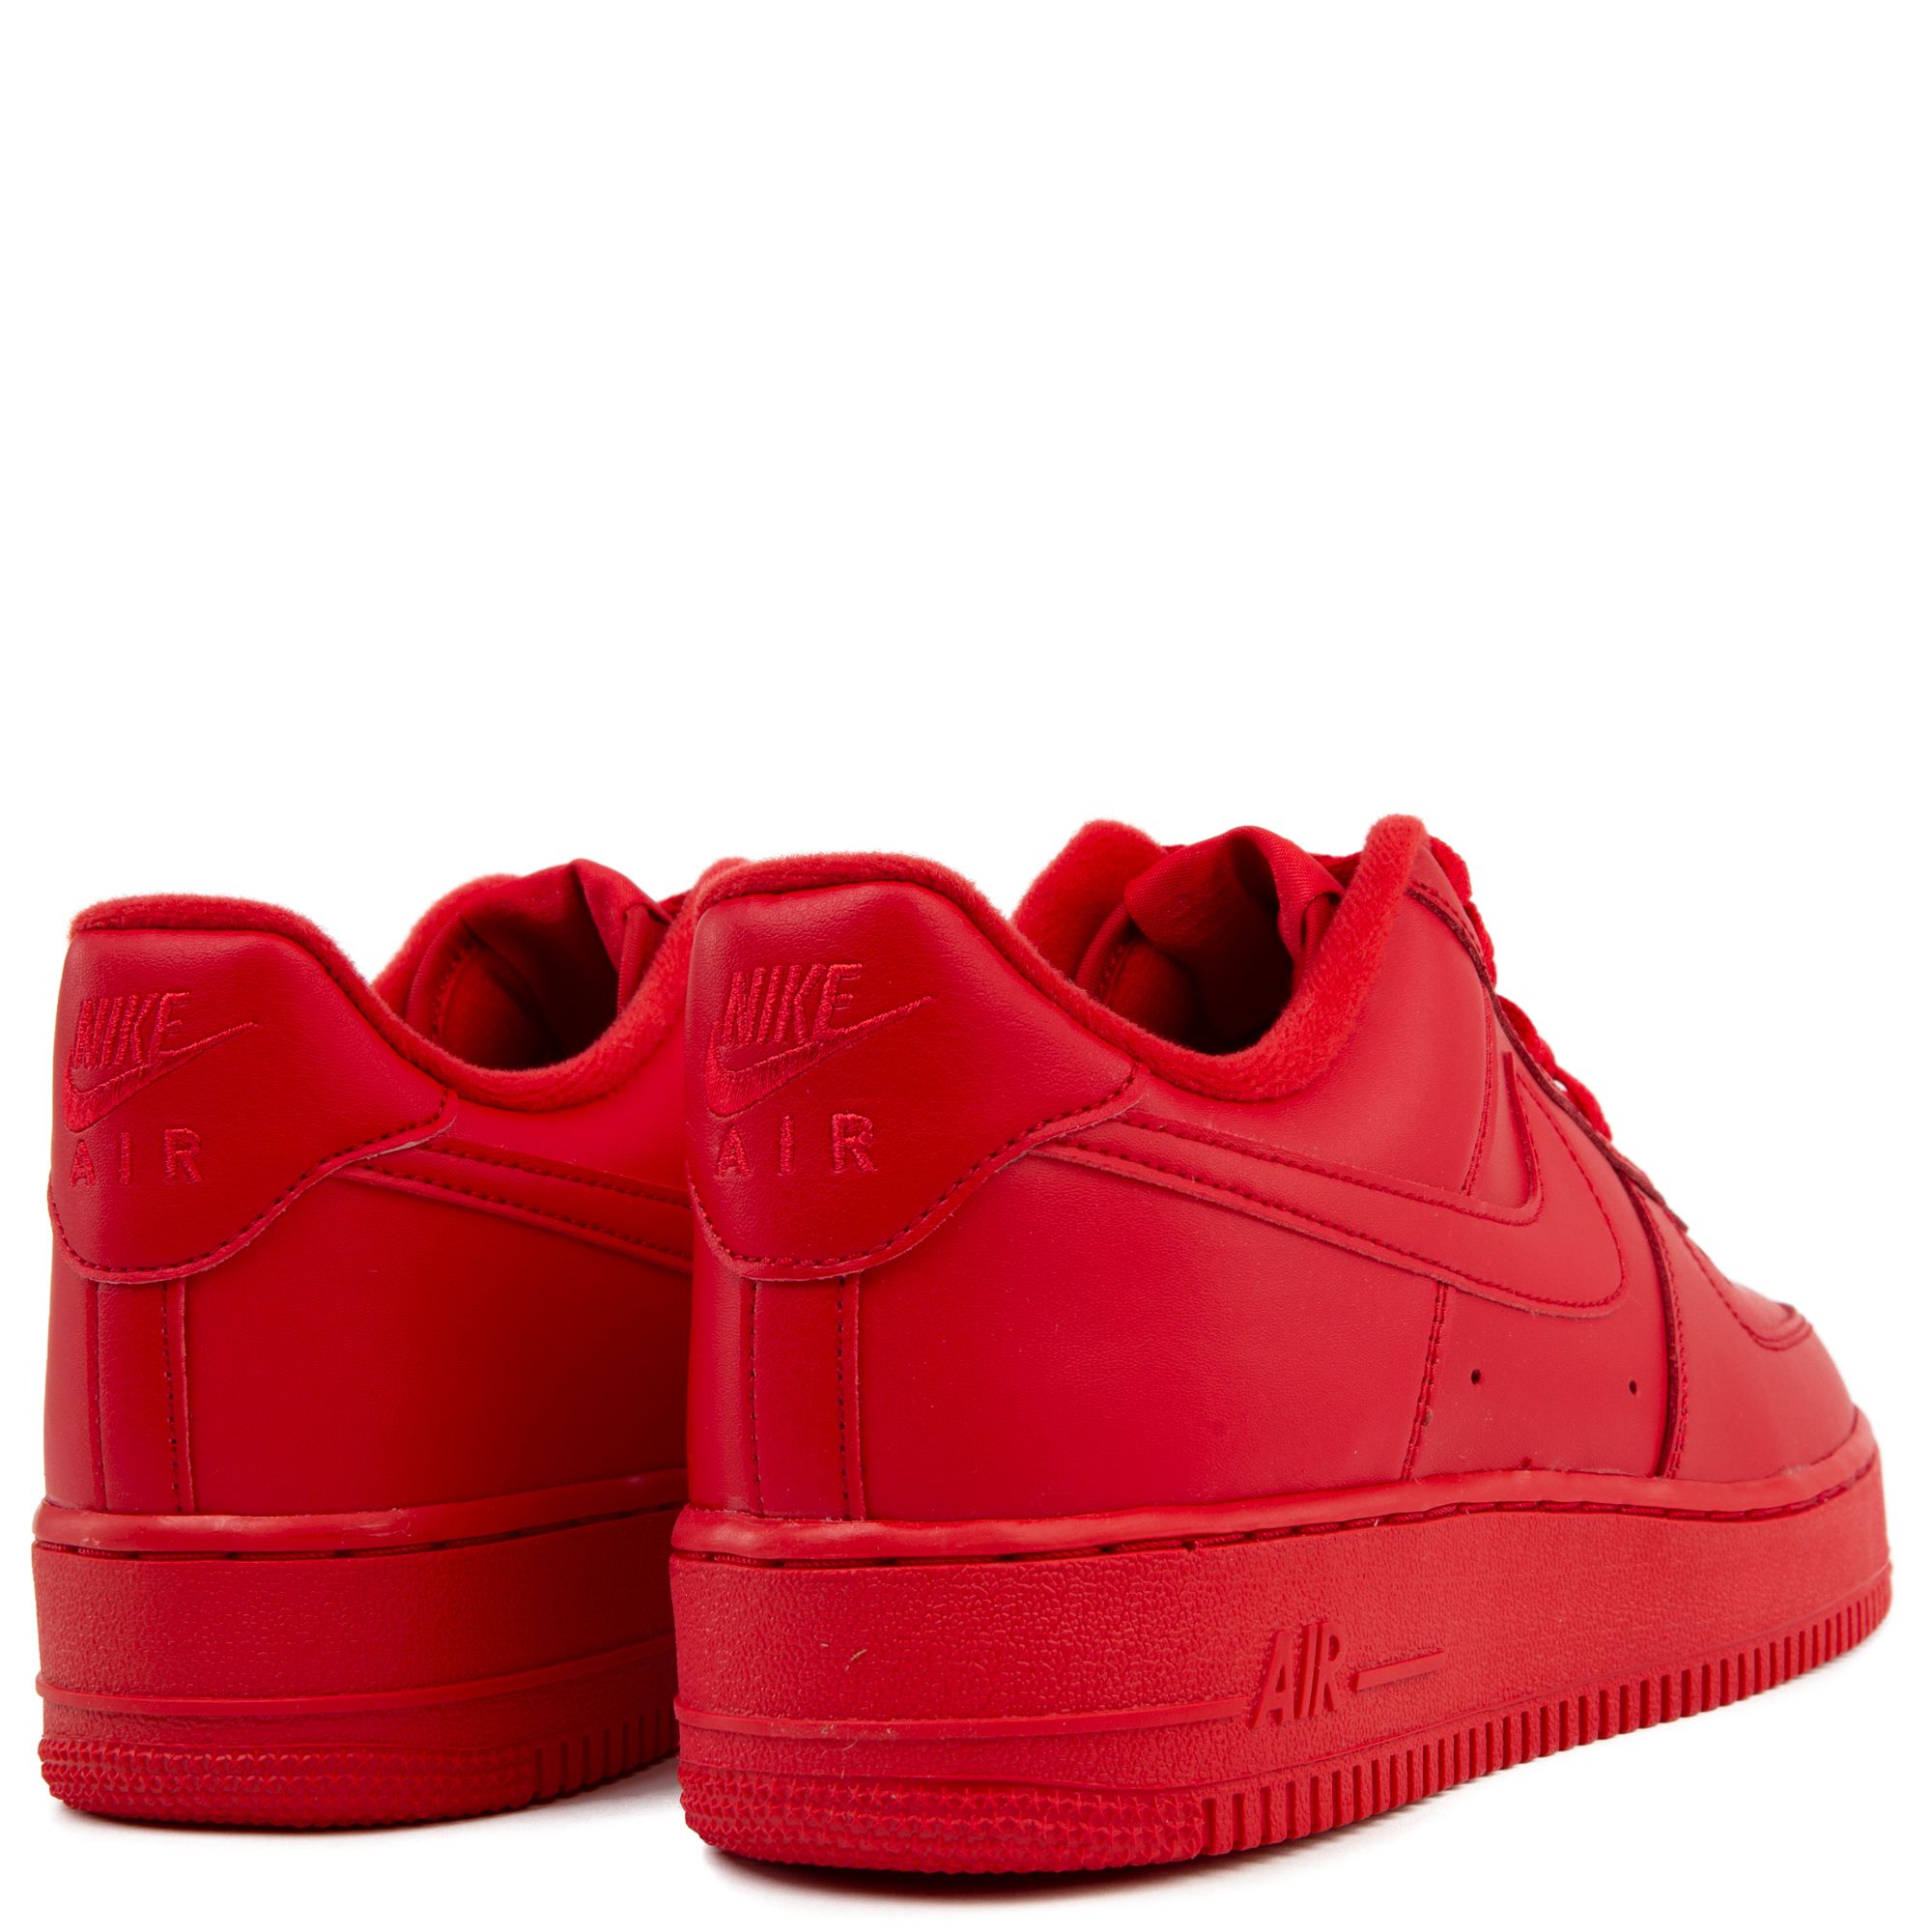 Shop Nike Air Force 1 '07 LV8 CW6999-600 red